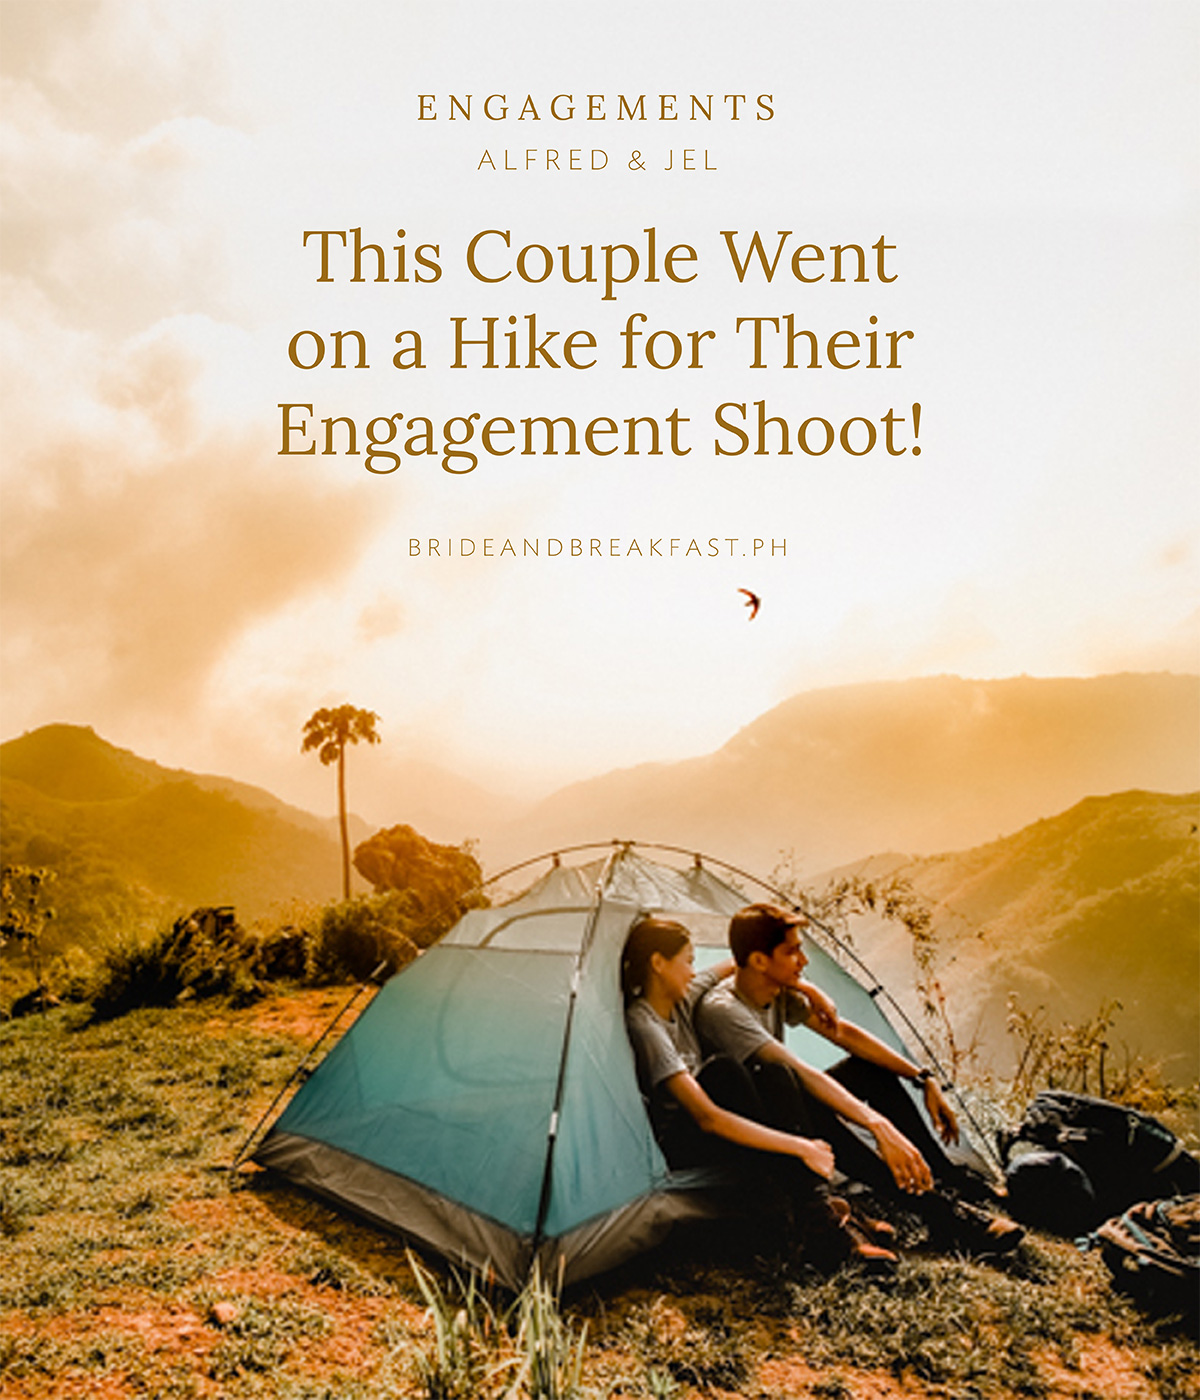 This Couple Went on a Hike for Their Engagement Shoot!